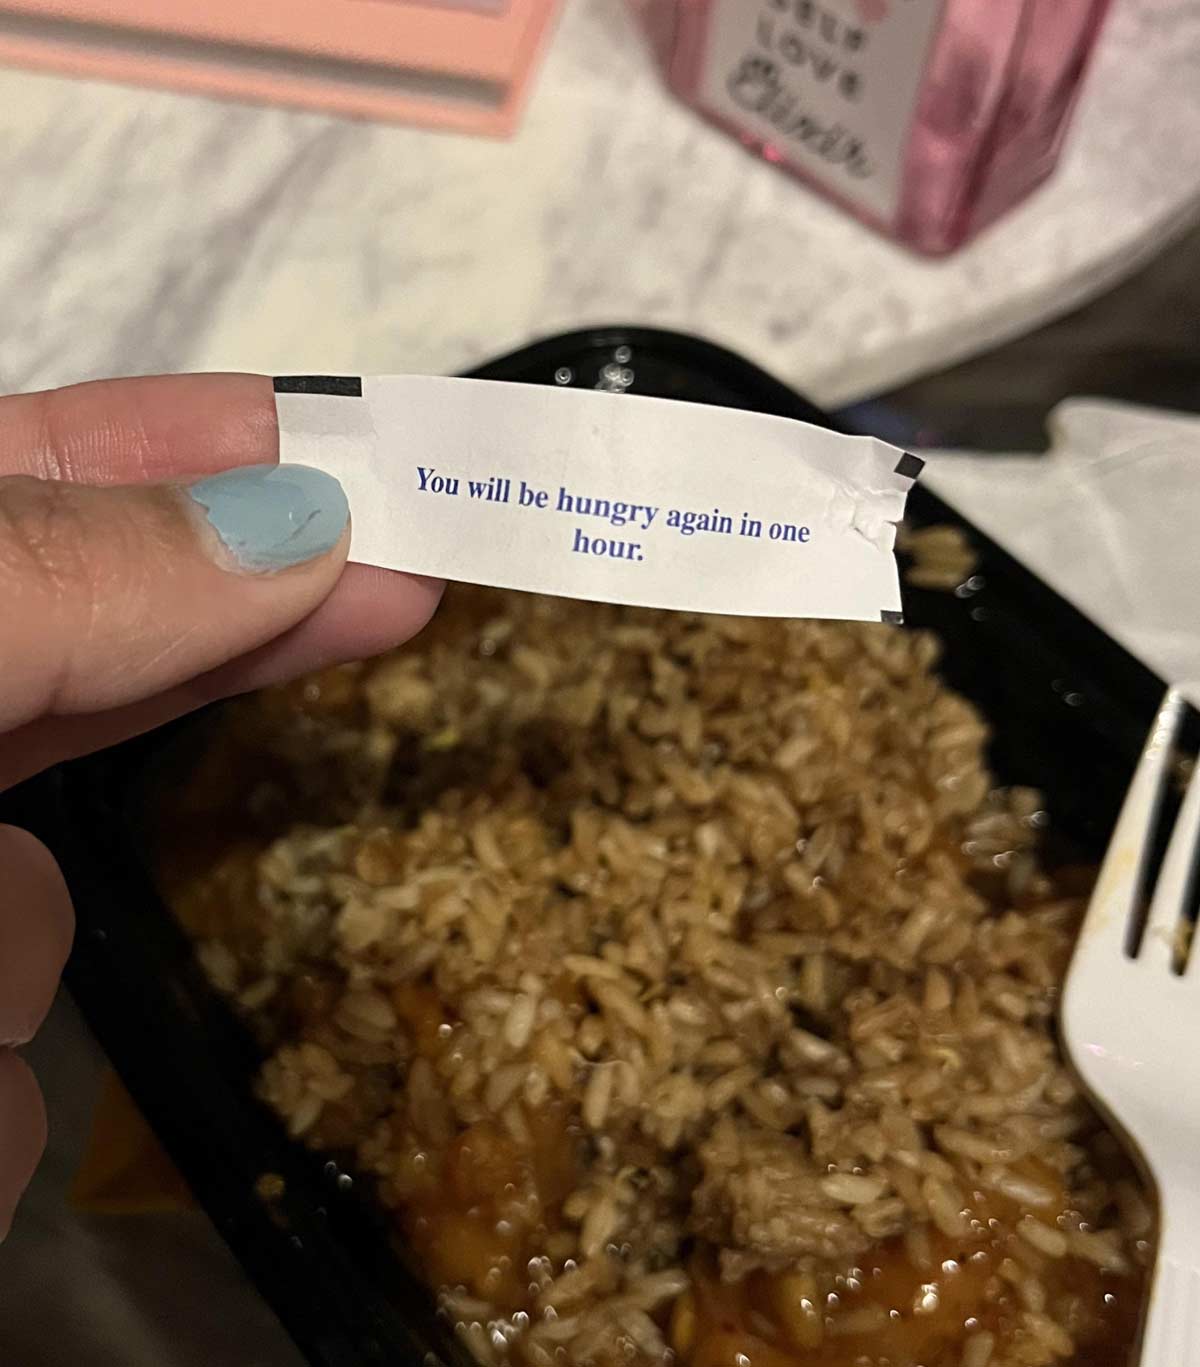 Accurate fortune cookie